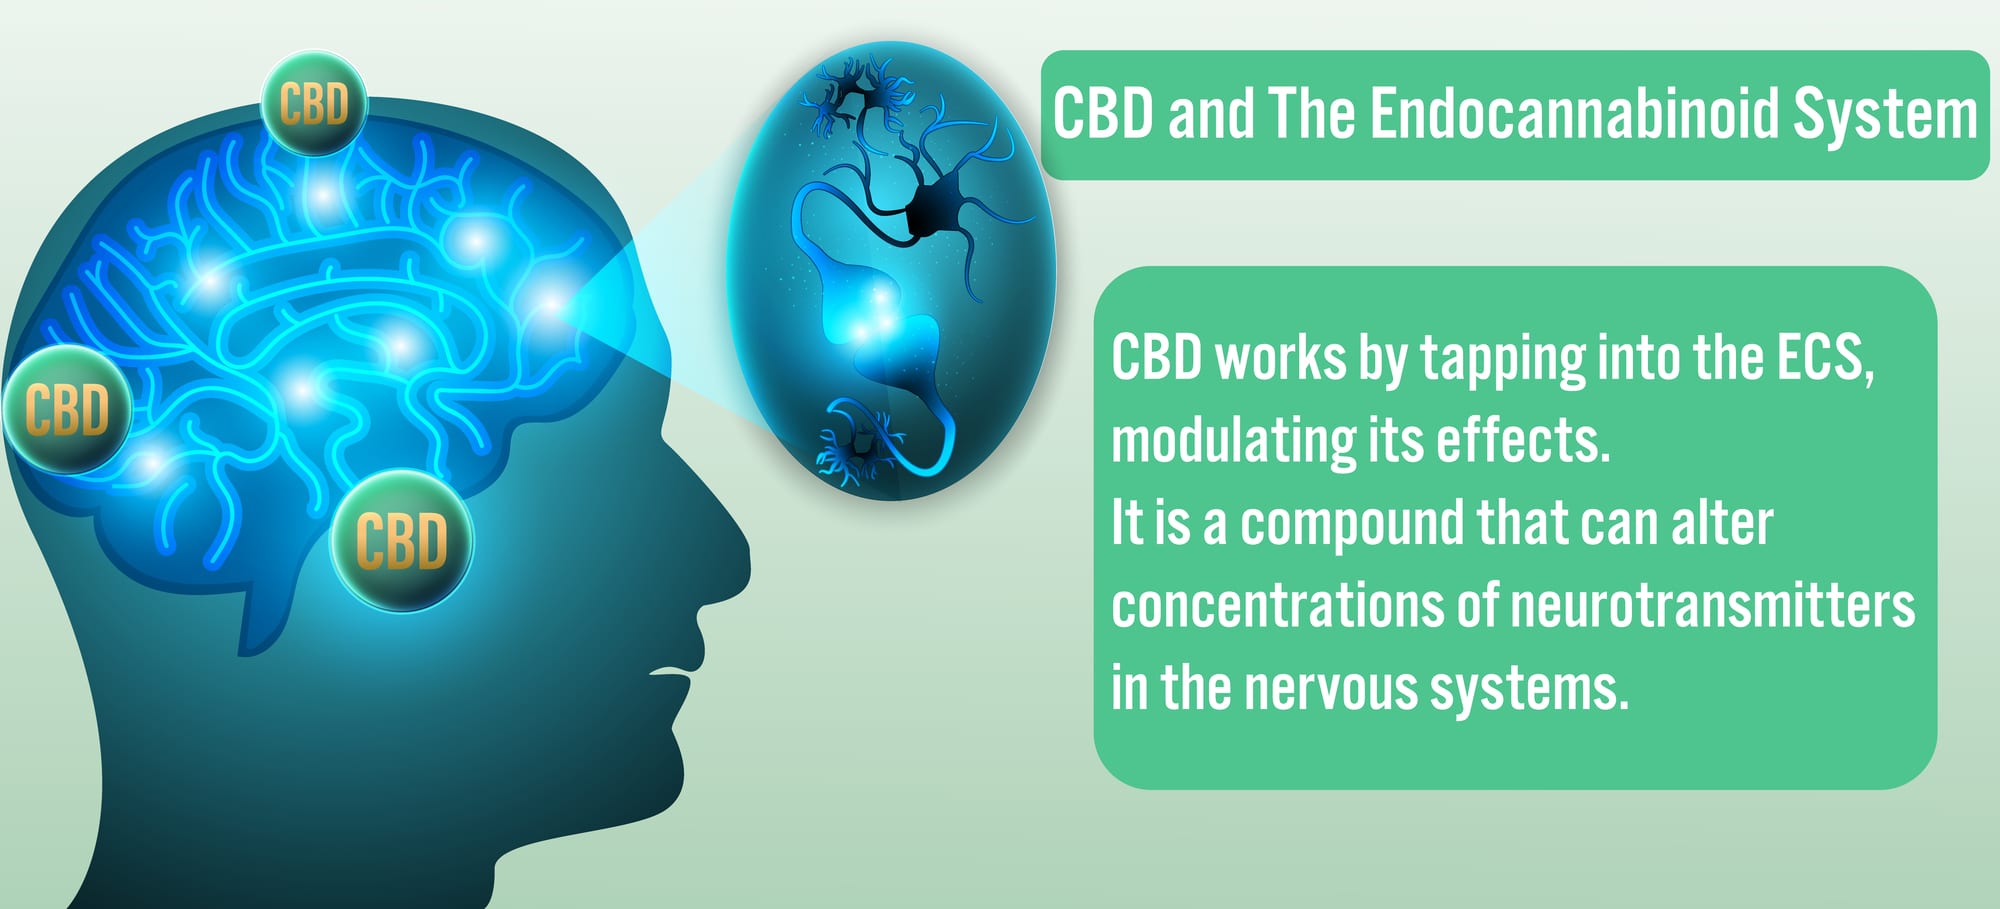 Featured image for “A Look at the Endocannabinoid System”